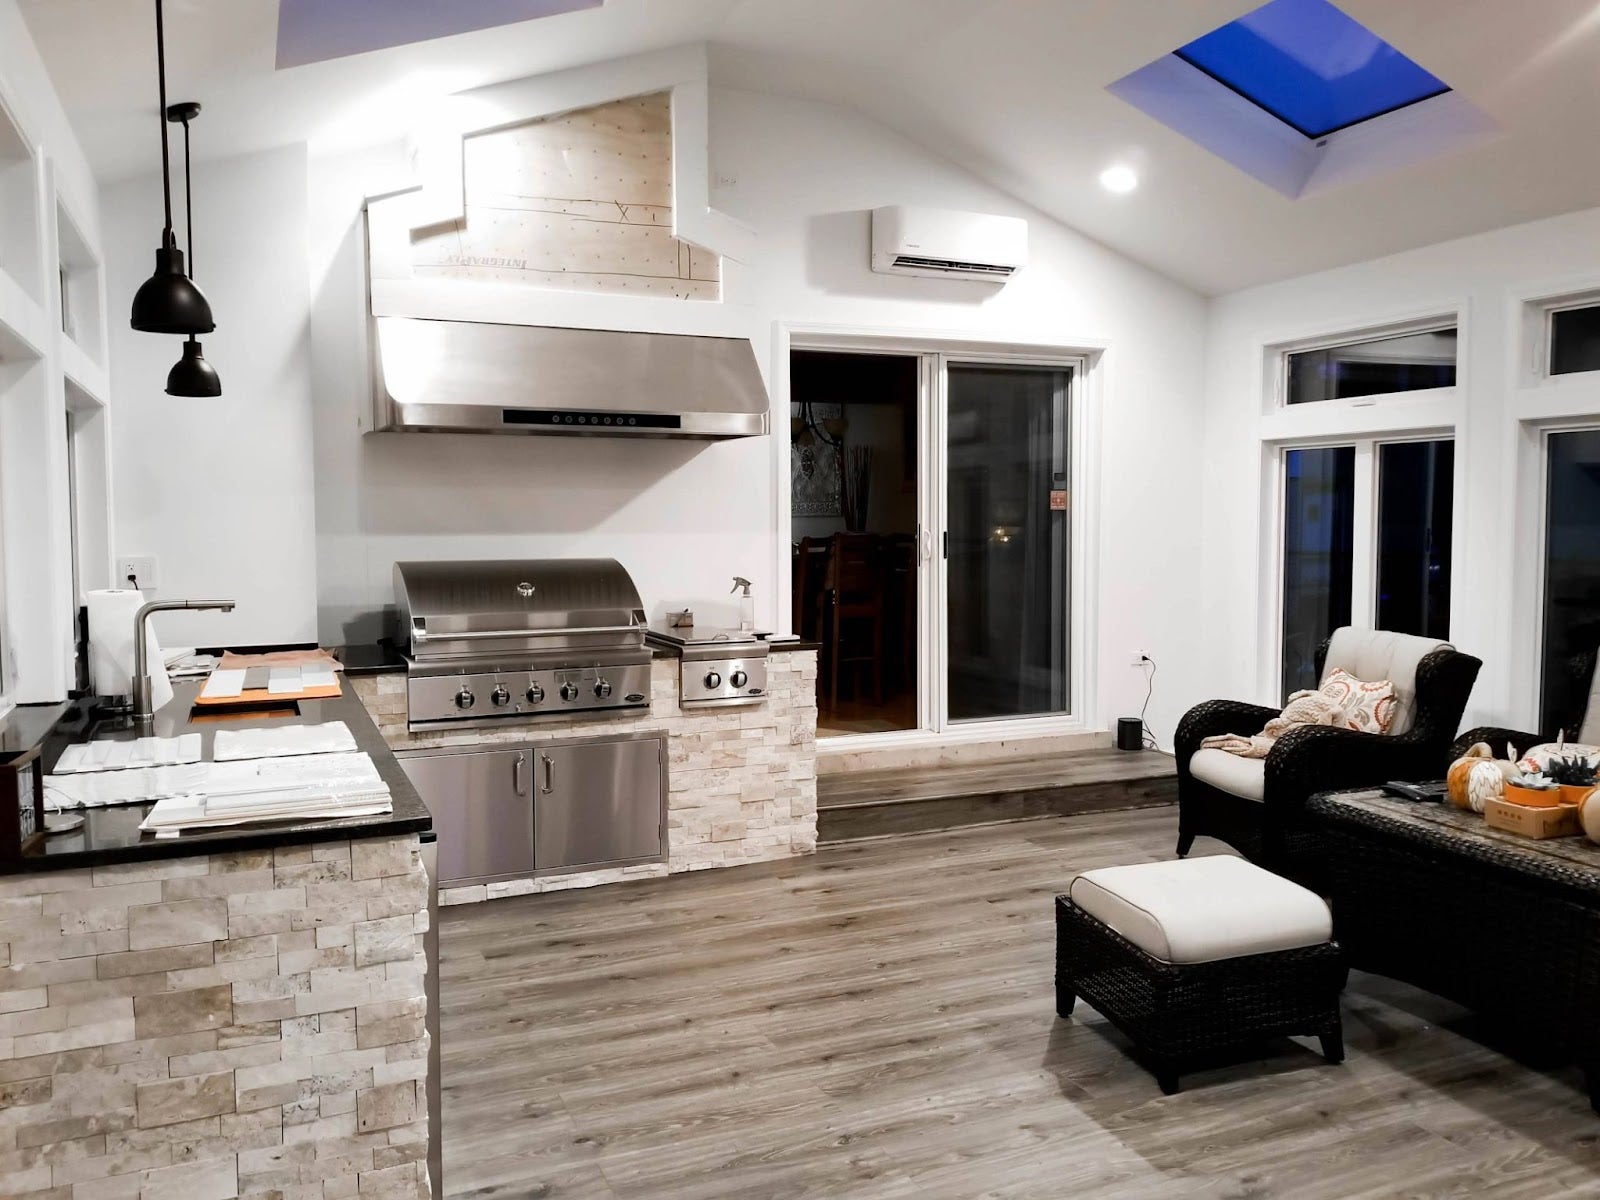 Spacious indoor patio with a Proline range hood over a grill, modern furniture, and skylights for natural lighting - prolinerangehoods.com